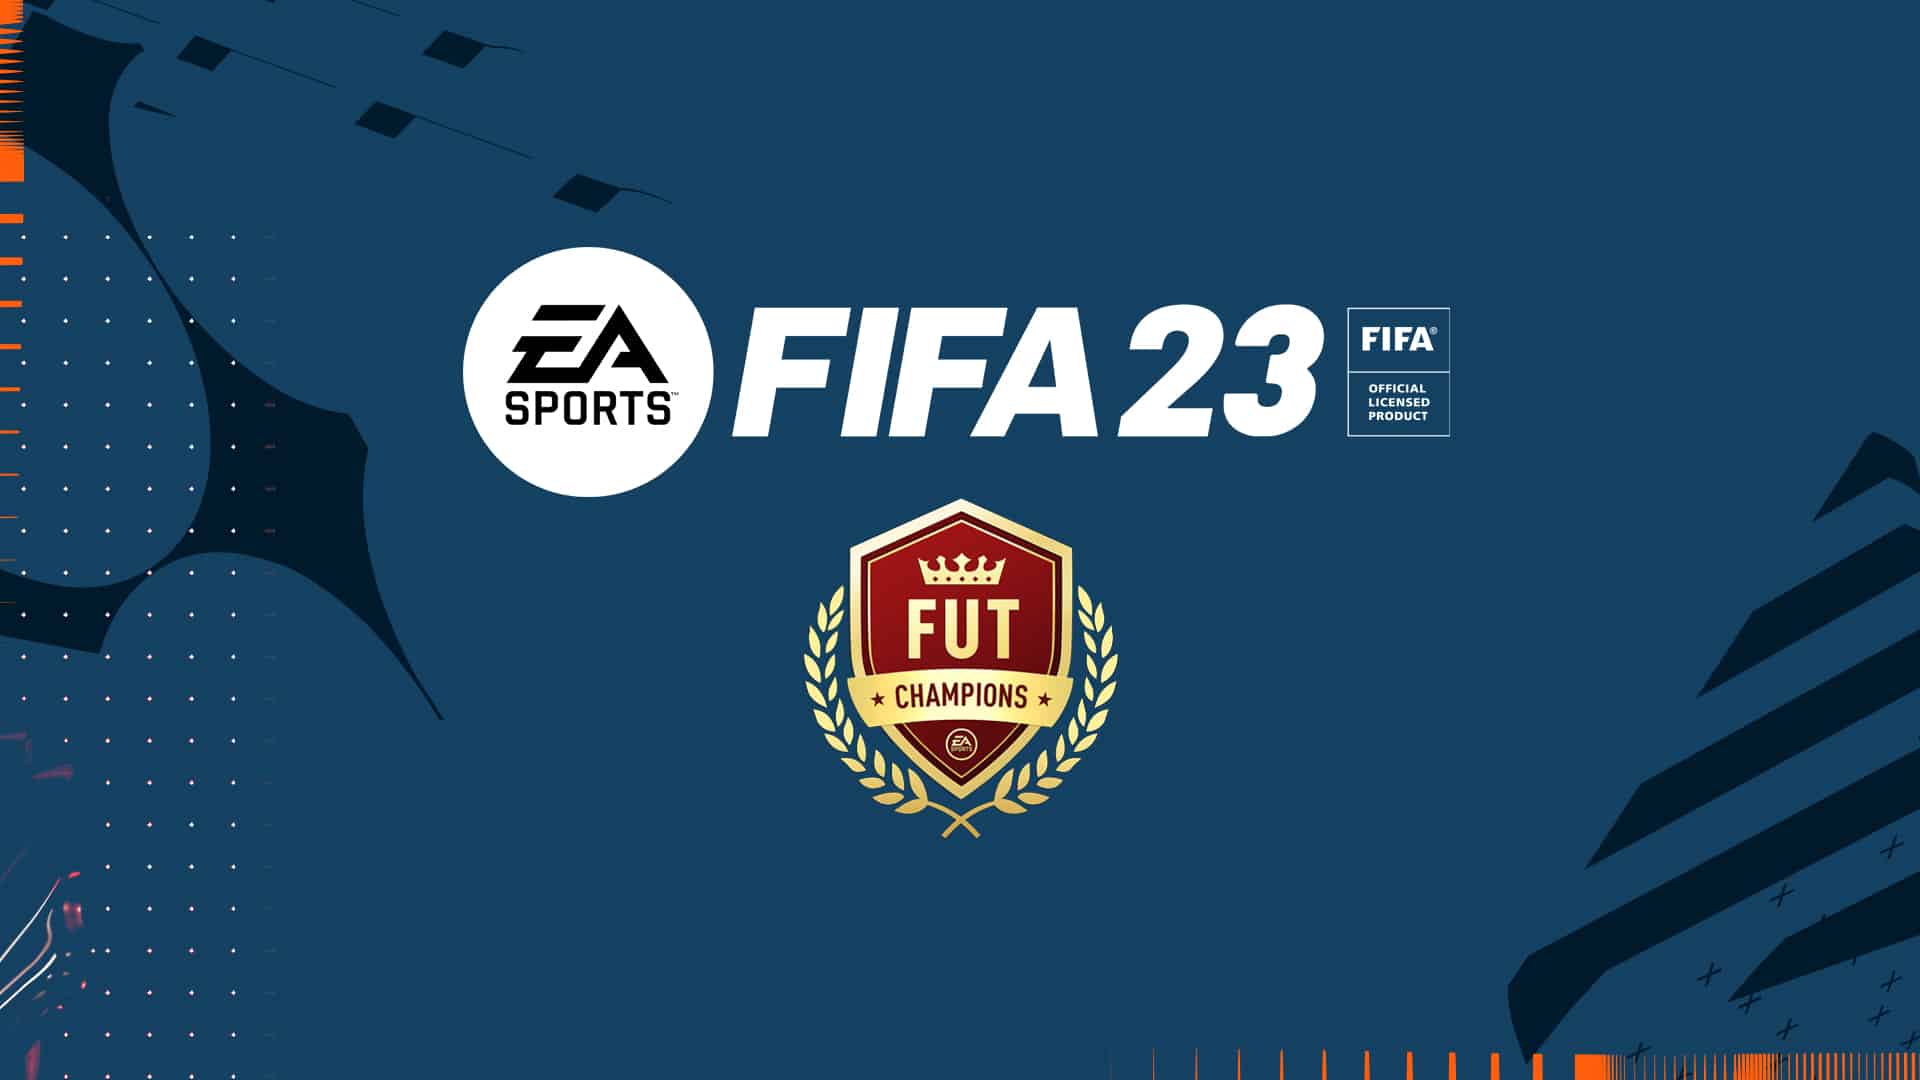 FIFA 23 FUT Champions Weekend League Rewards are increasing starting January 6th - UK